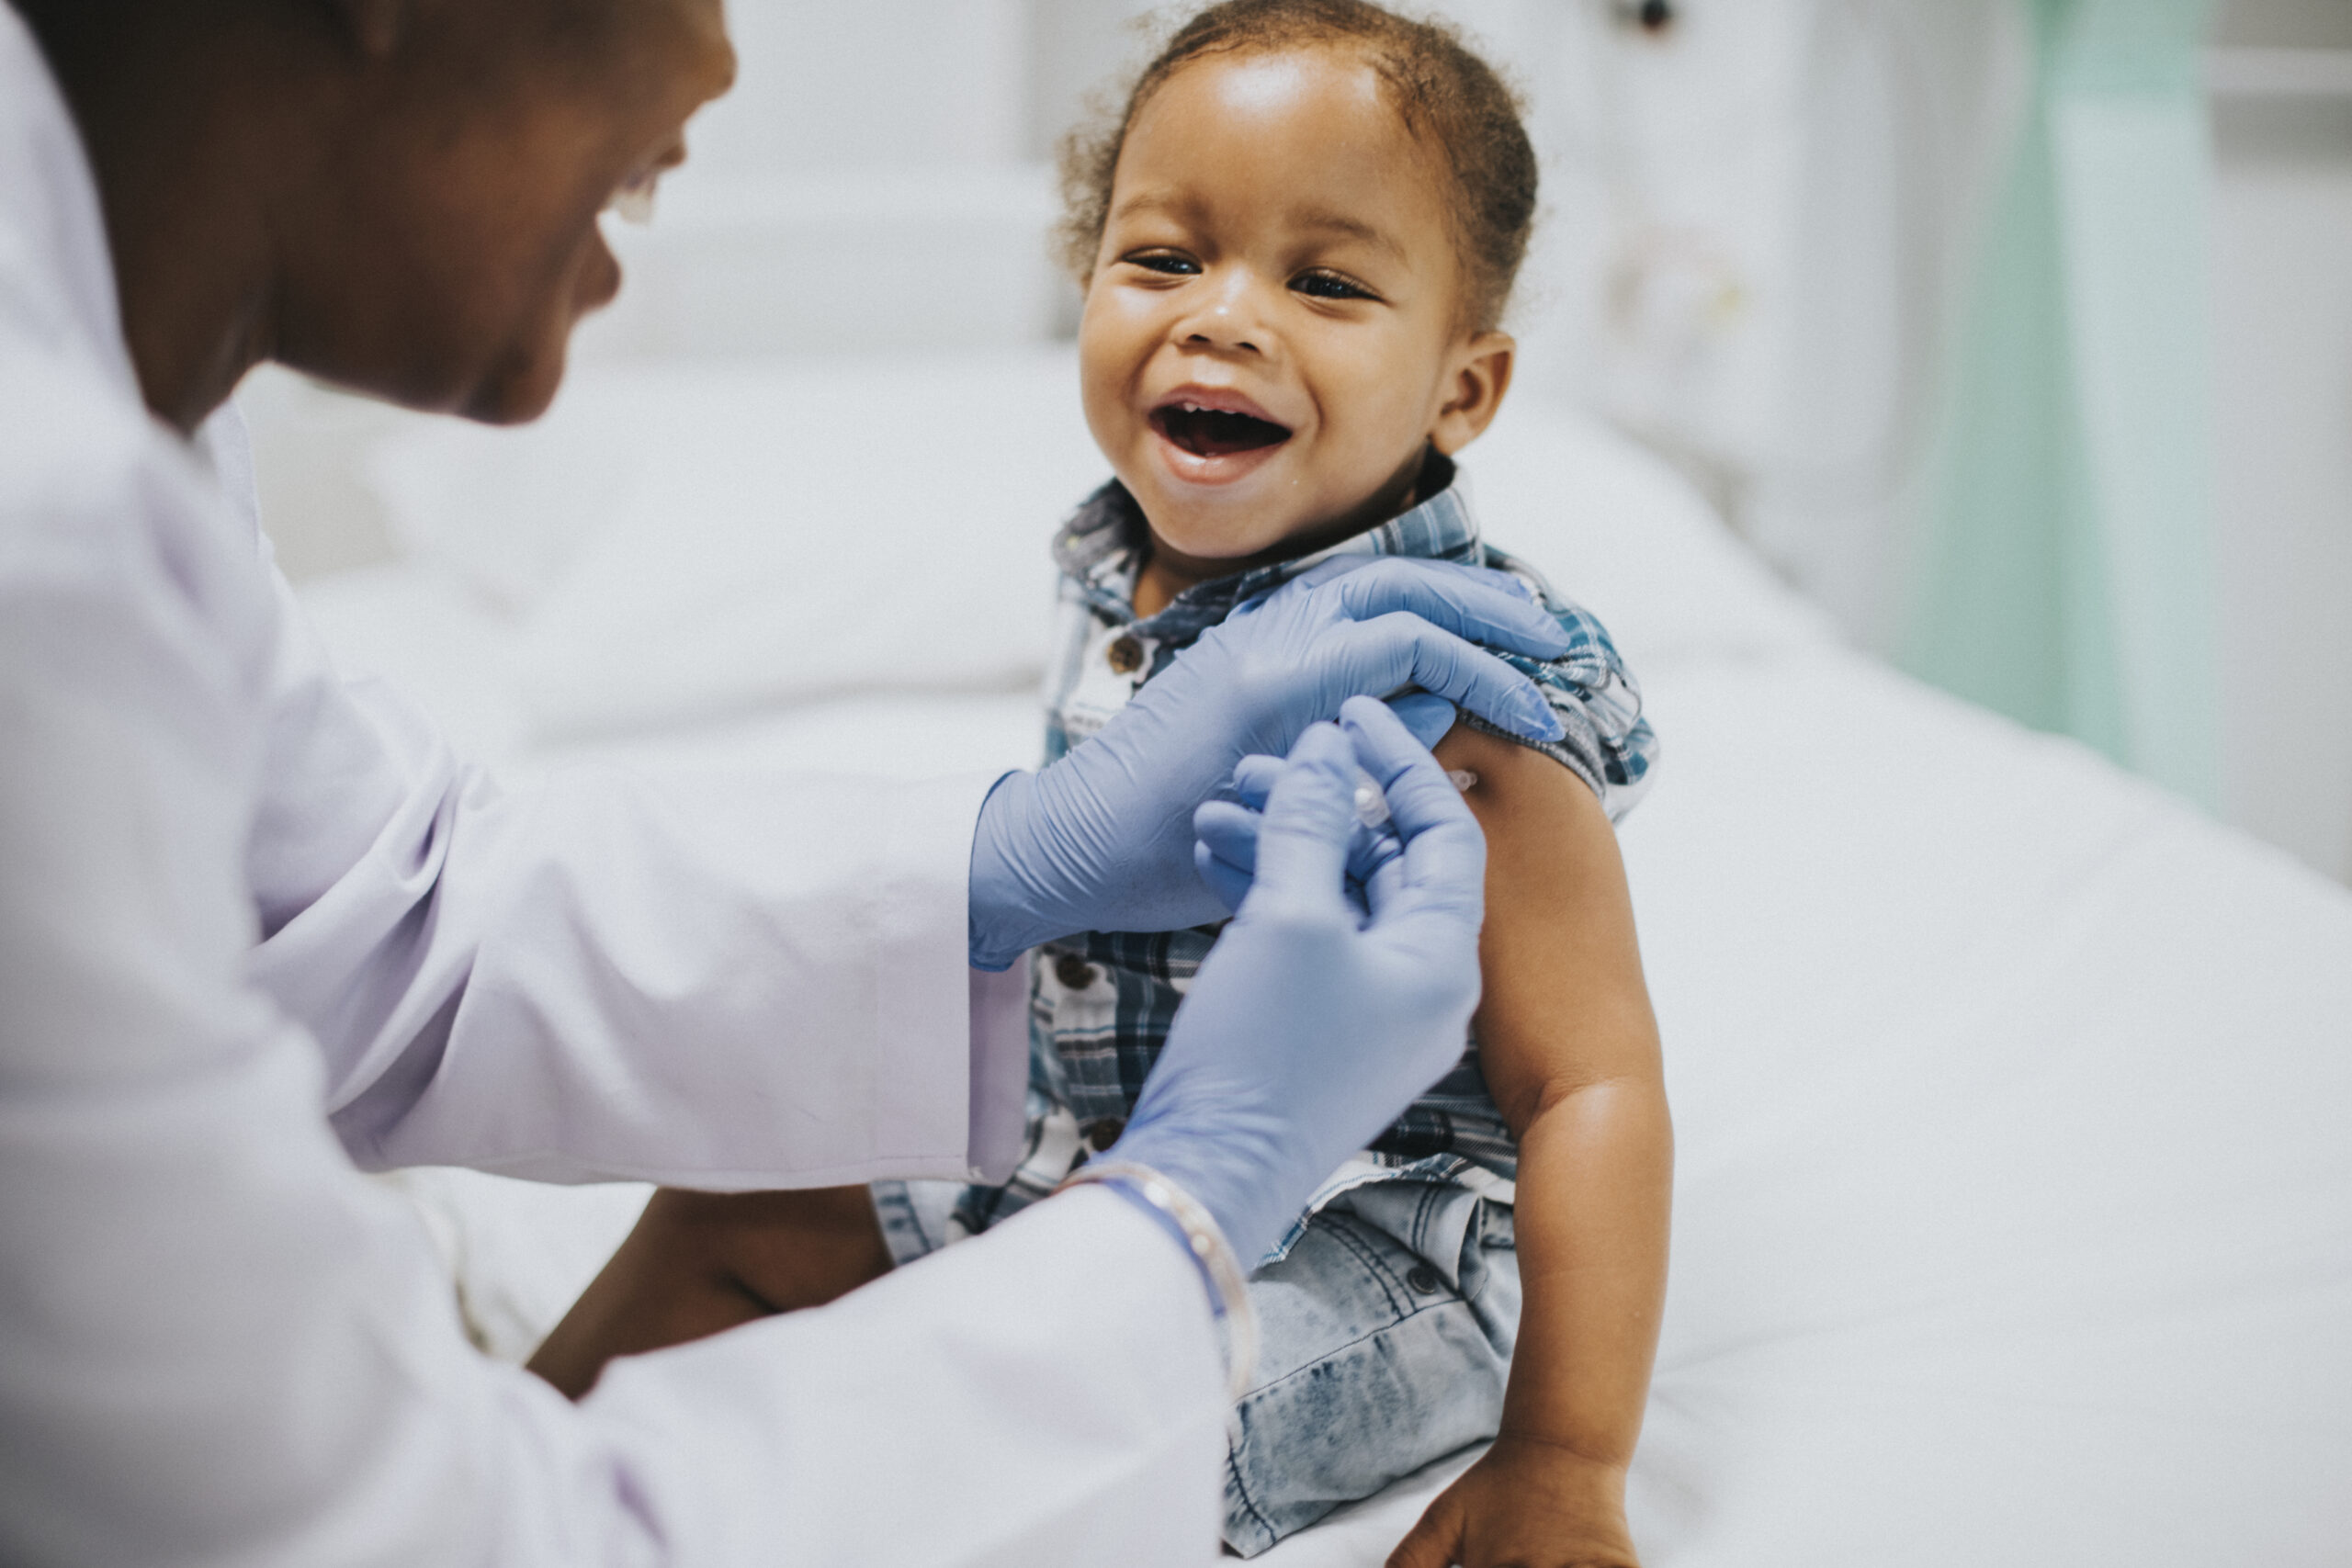 toddler-getting-a-vaccination-by-a-pediatrician-scaled-1.jpg